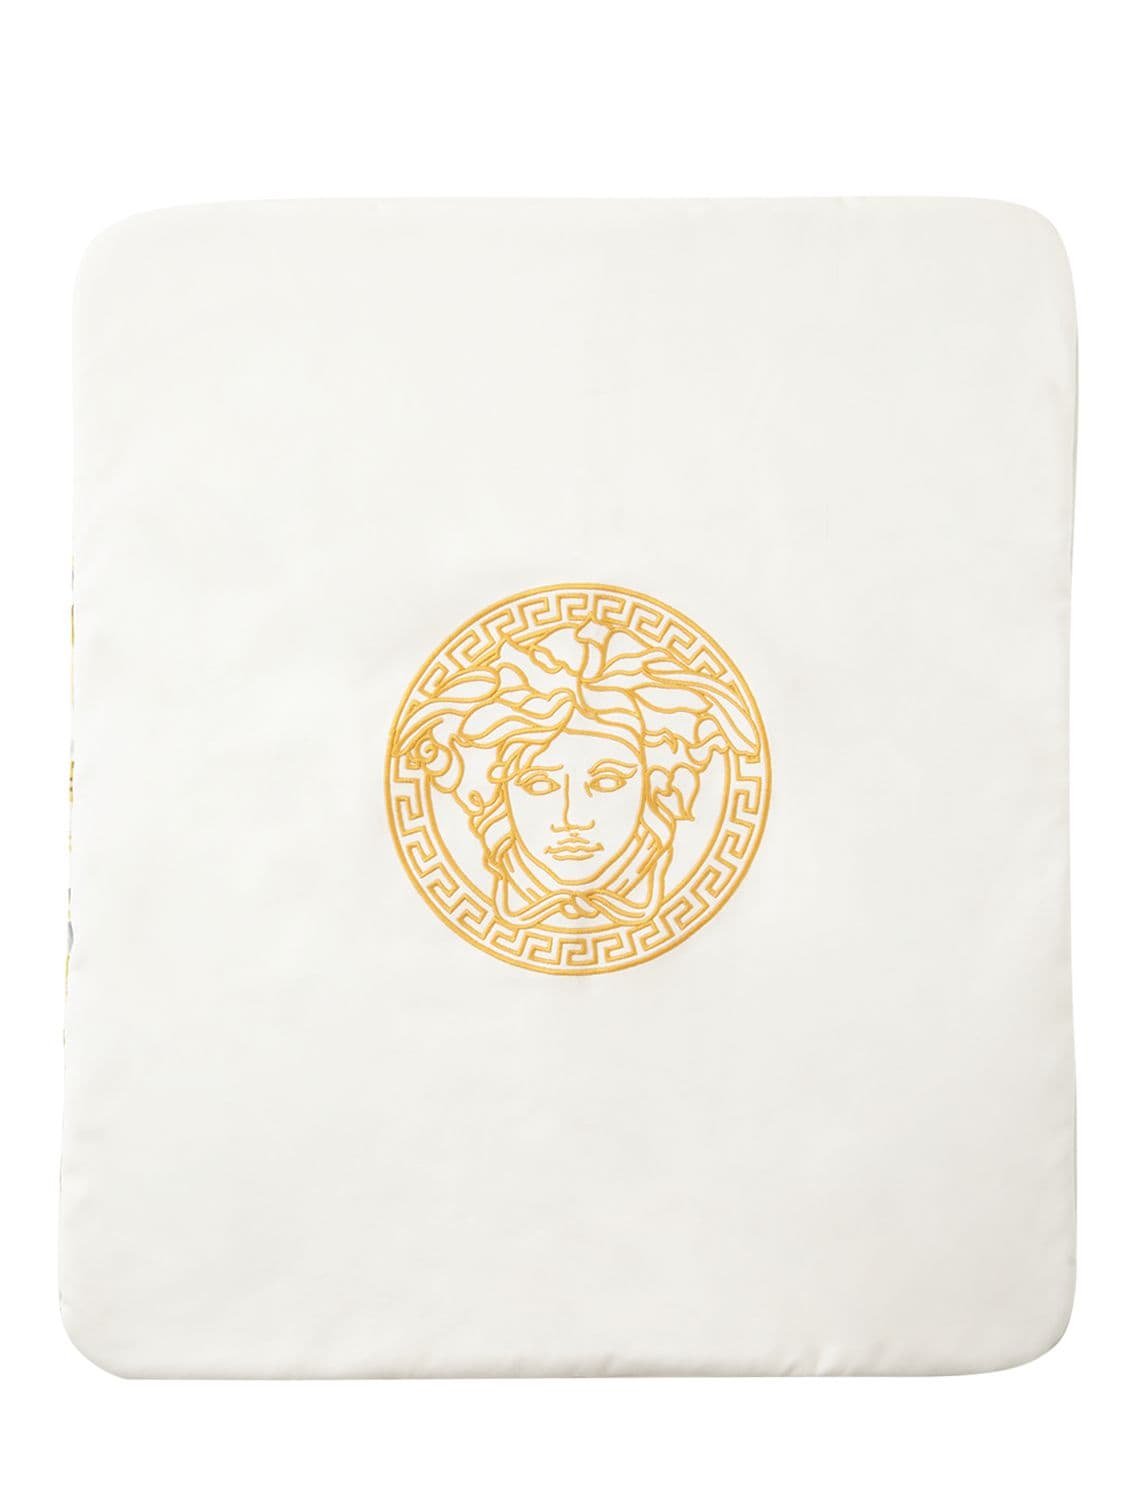 VERSACE EMBROIDERED & PRINTED JERSEY BLANKET,74ILXR028-MLCXMTA1